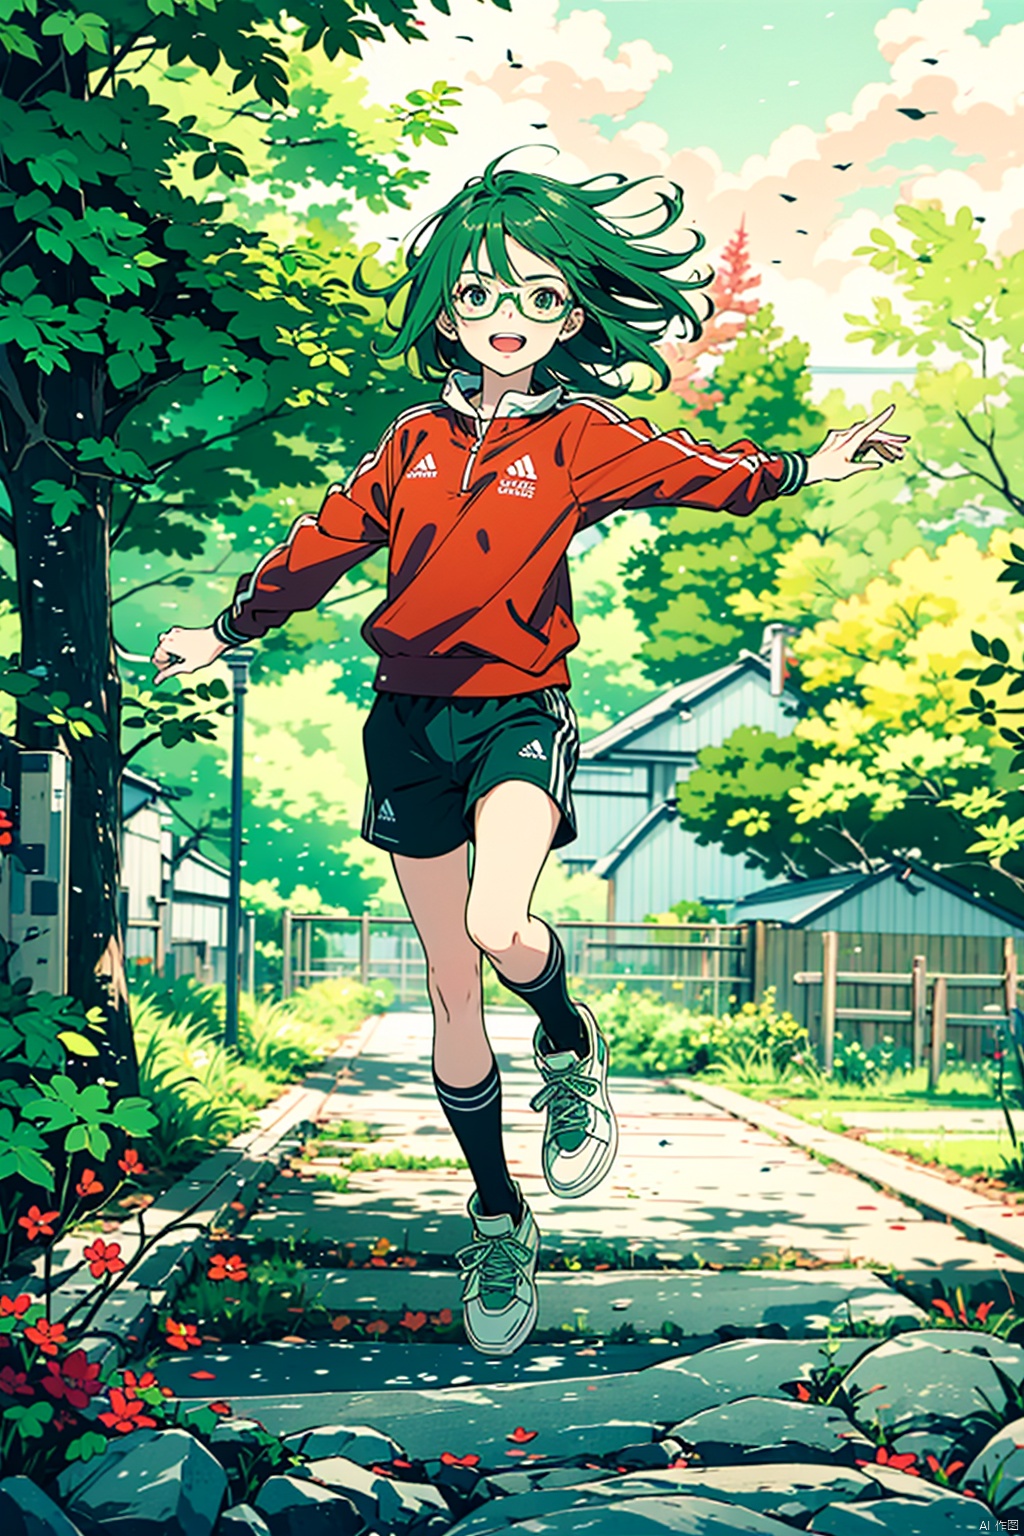  1 middle-aged female, green hair, full body photo, sportswear, jumping action, cheerful, glasses, outdoor, depth of field